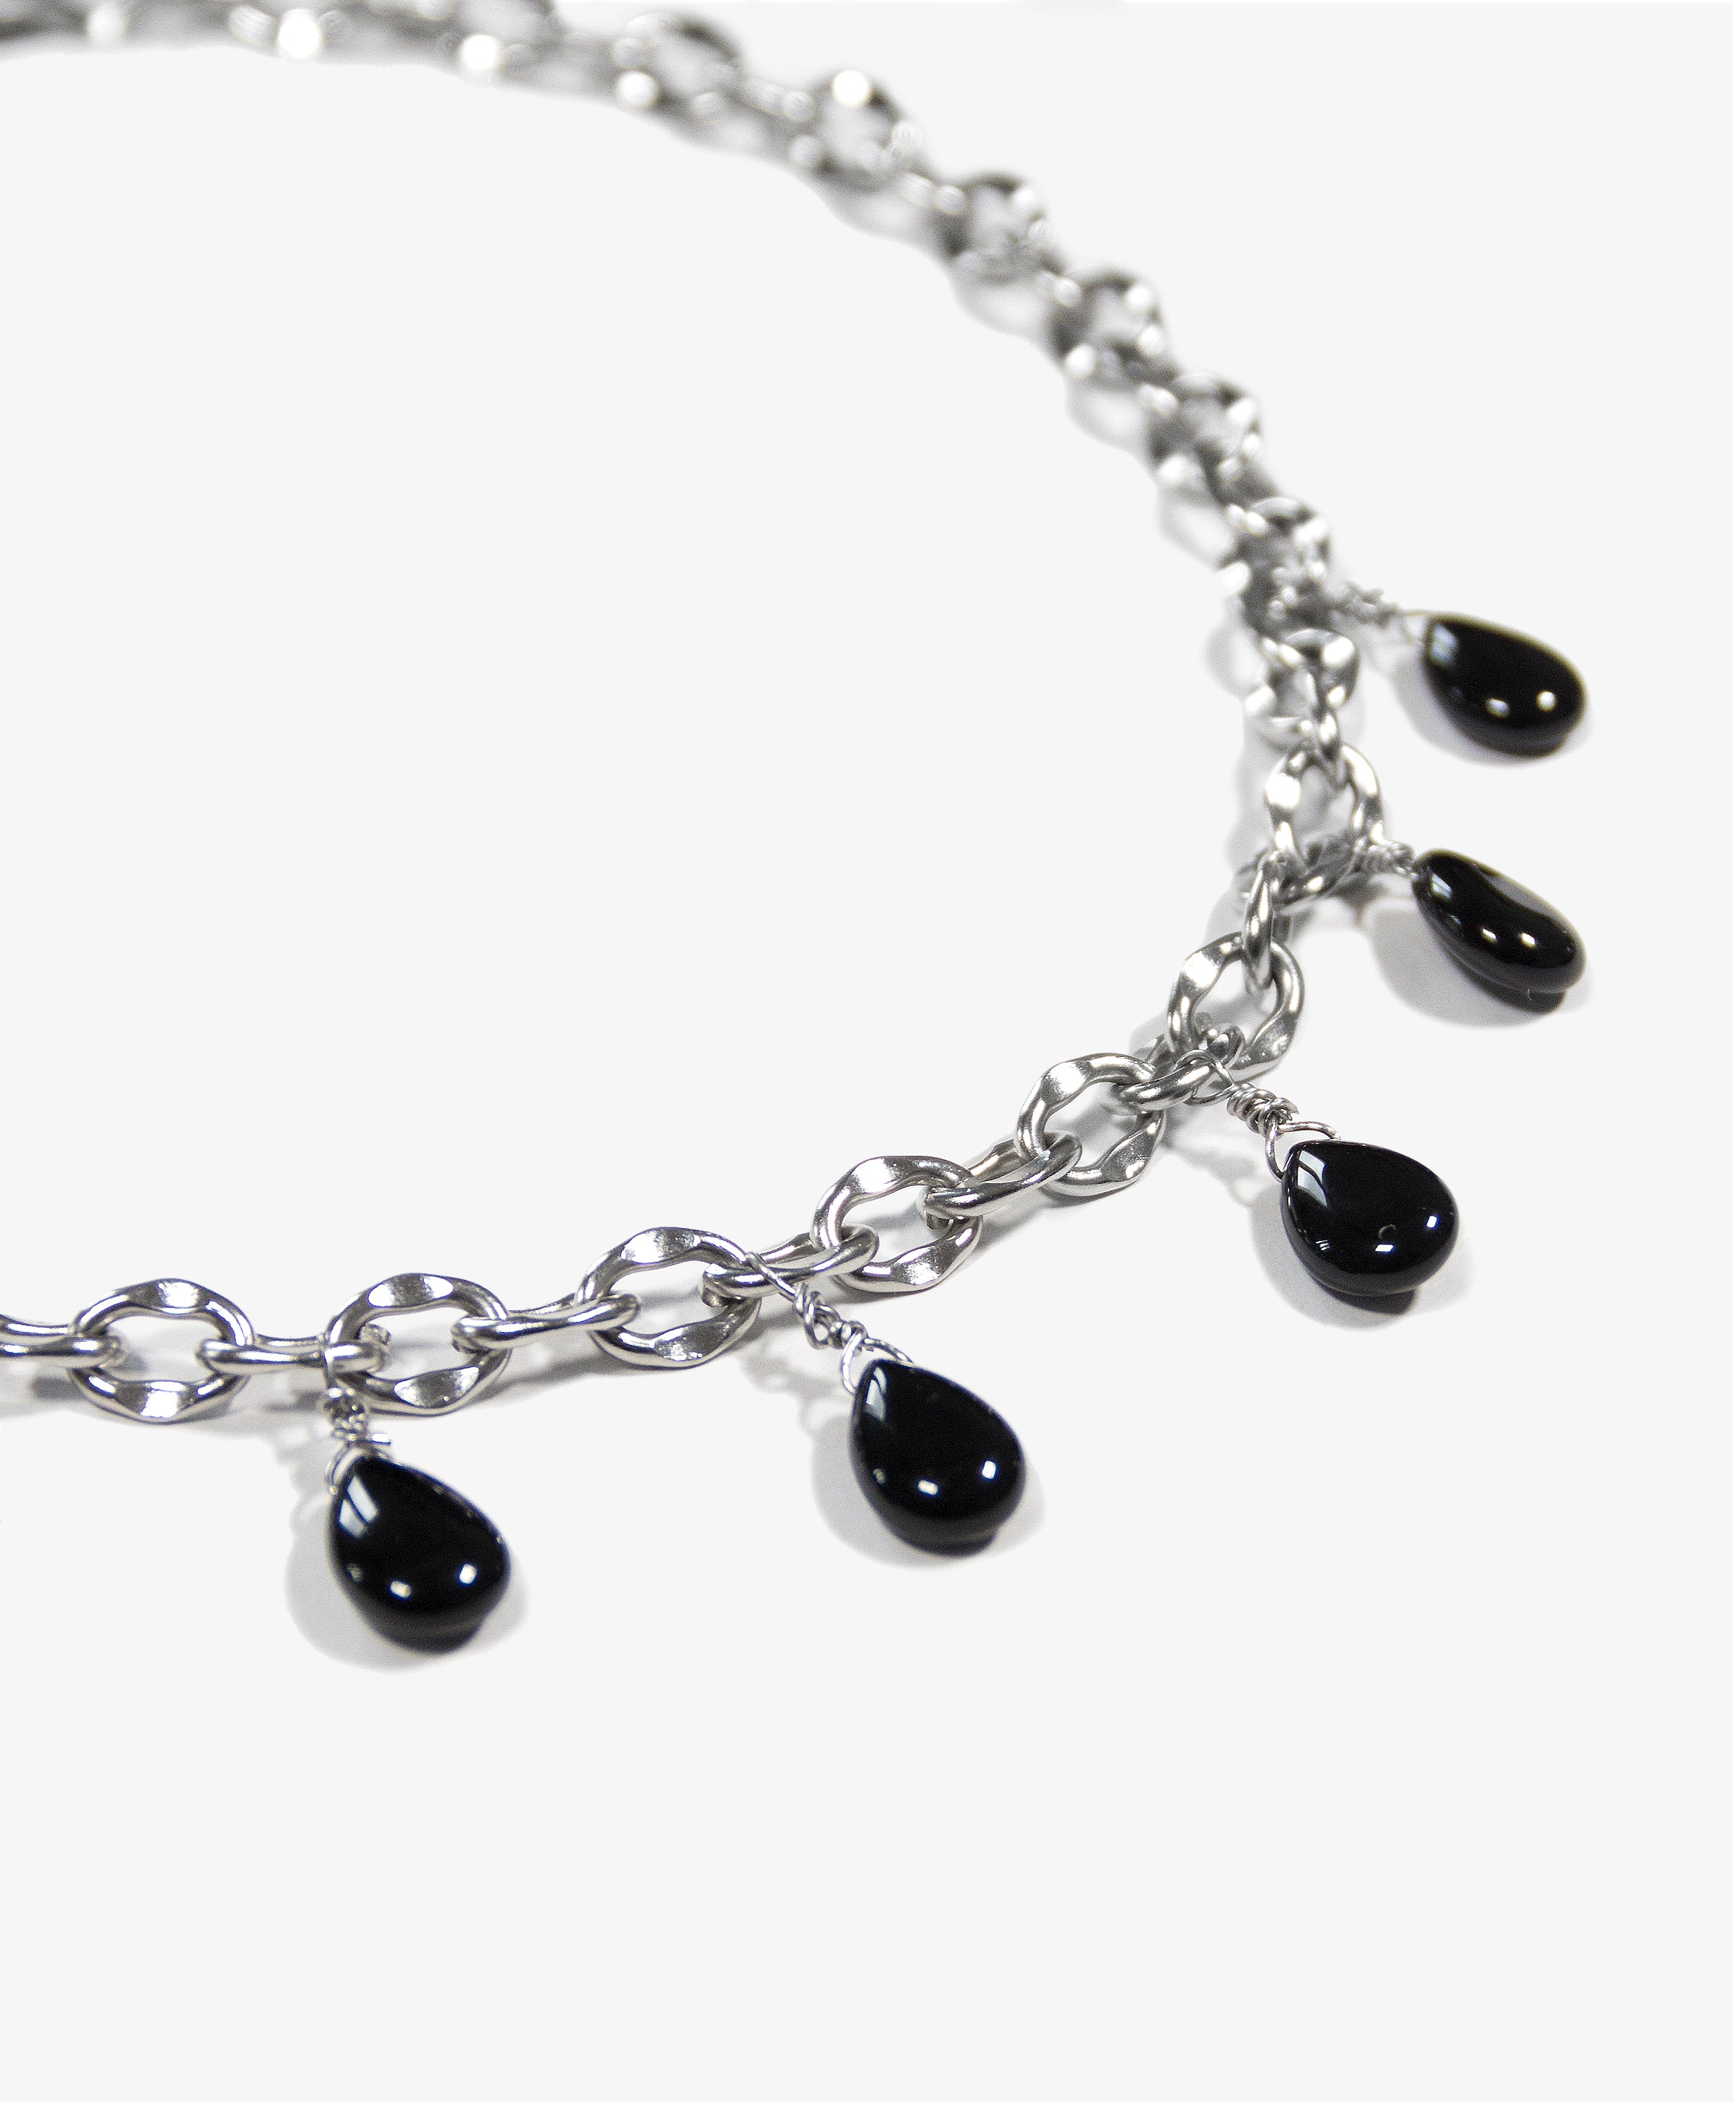 llayers-mens-women-jewelry-silver-stainlesssteel-choker-chain-necklace-unchained-009-agate-Brooklyn-New-York-F2